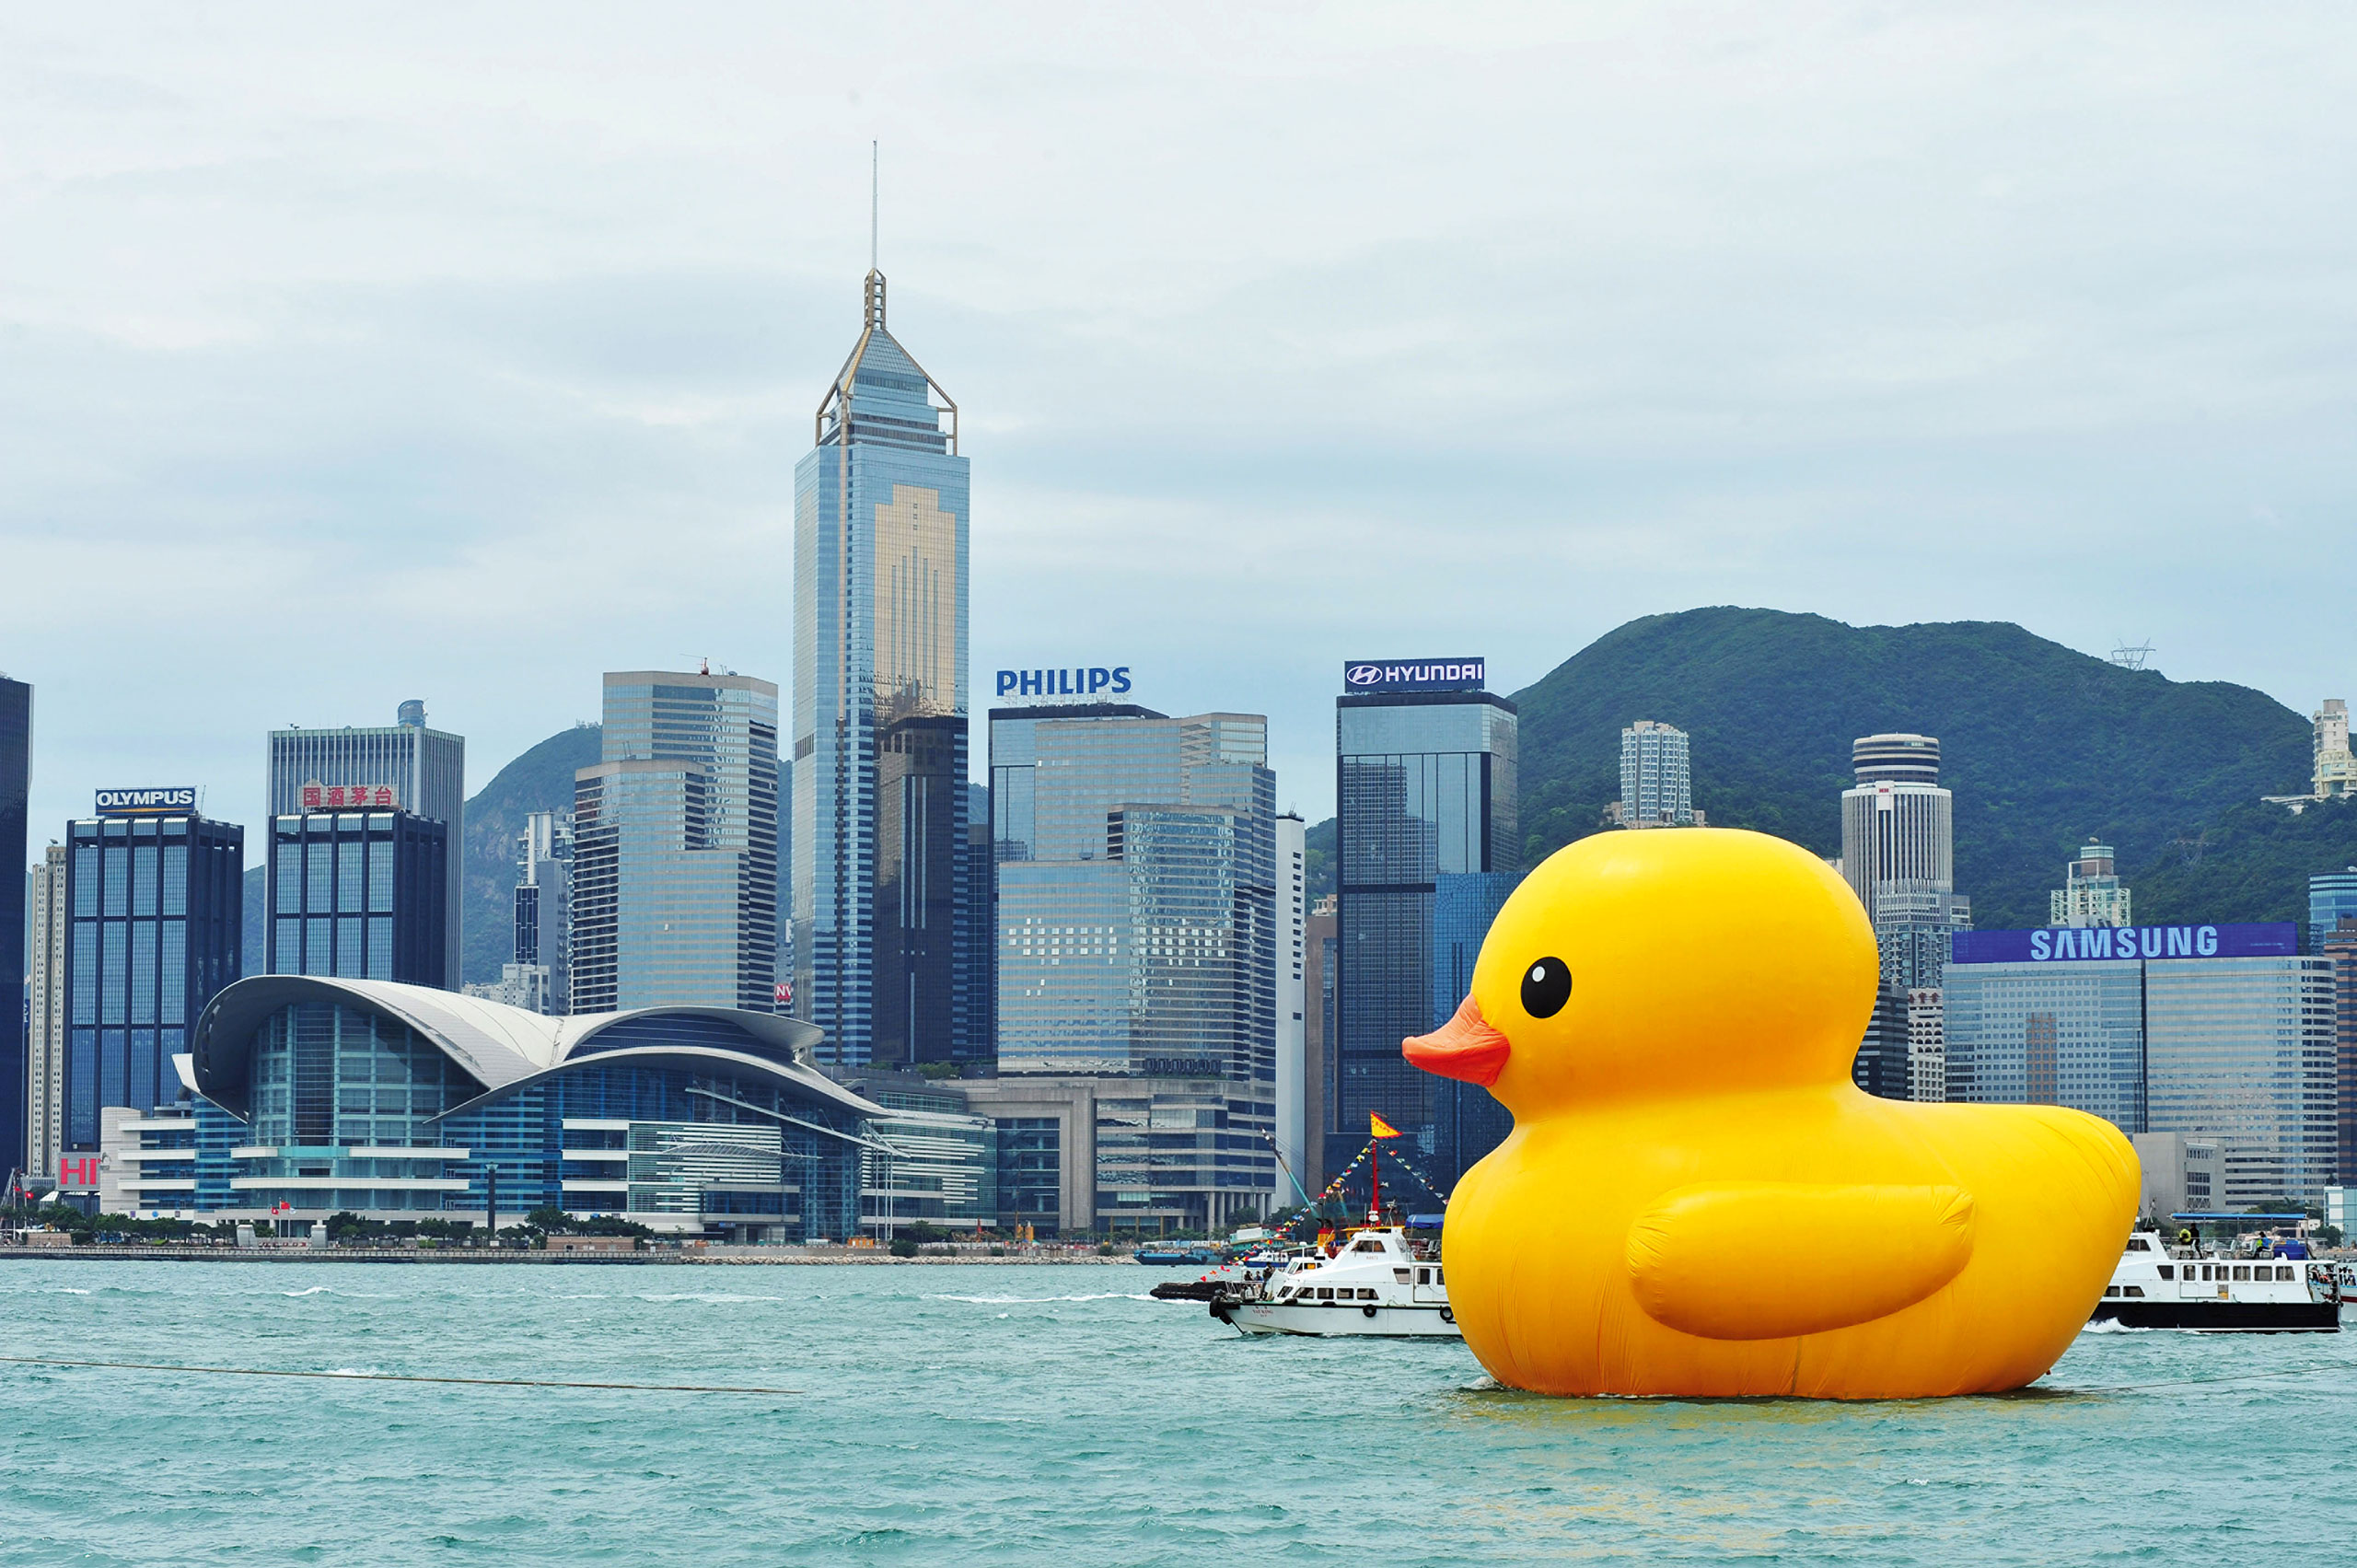 Florentijn Hofman, Rubber Duck, 2013. PVC, H. 16.5 m, temporary installation, Hong Kong. All Rights Reserved. Courtesy Studio Florentijn Hofman. Courtesy PHAIDON.